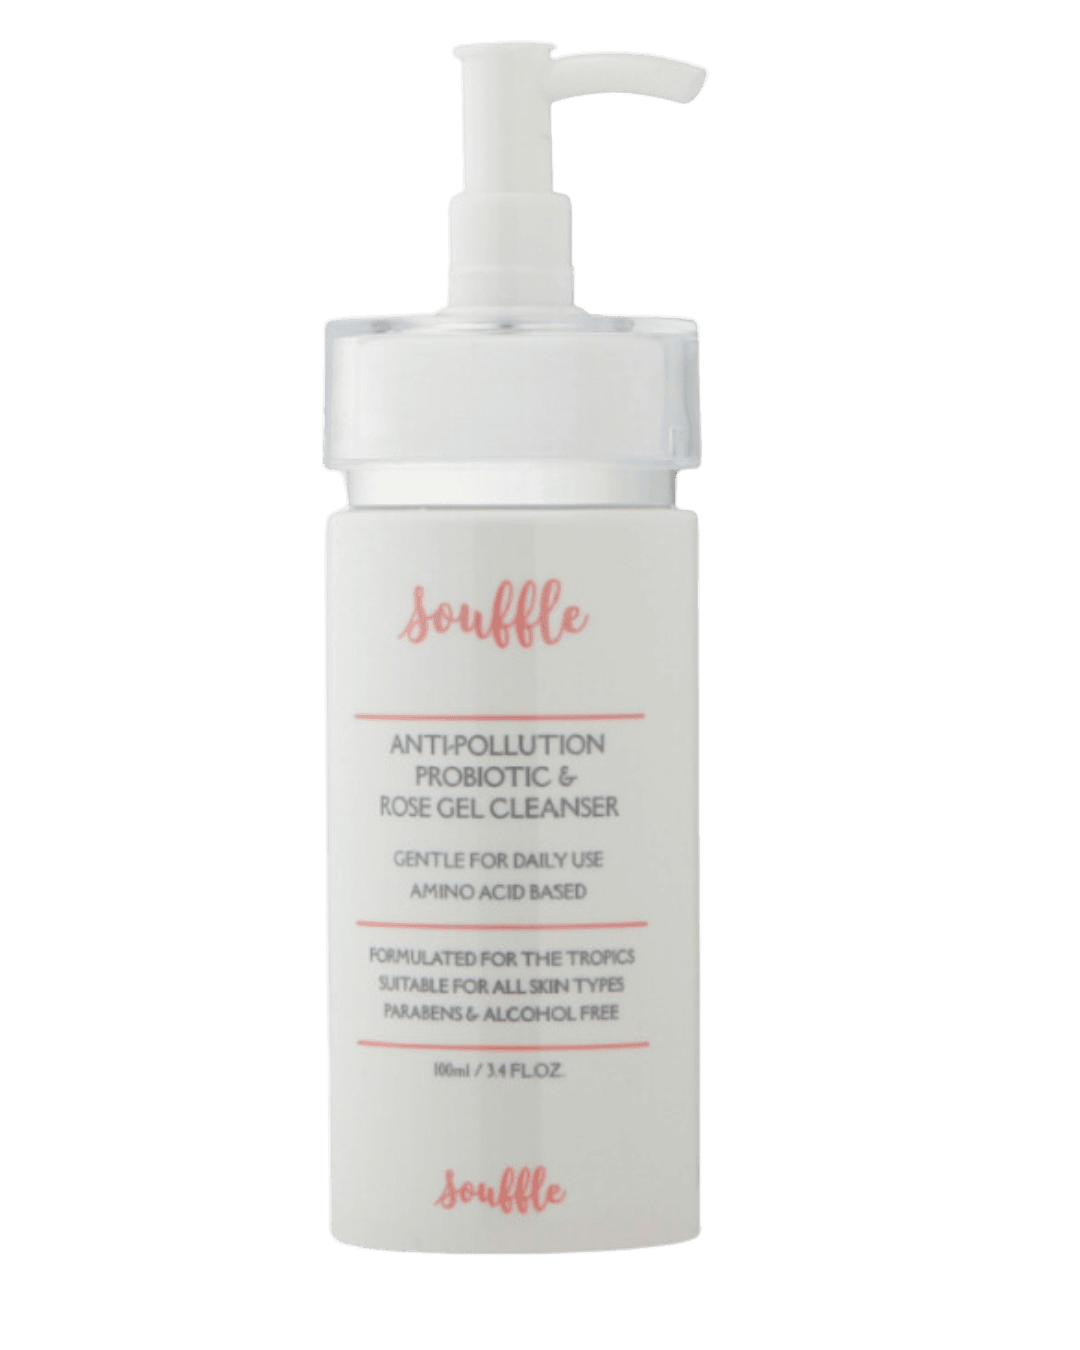 Souffle Beauty Anti-Pollution Probiotic &#038; Rose Gel Cleanser